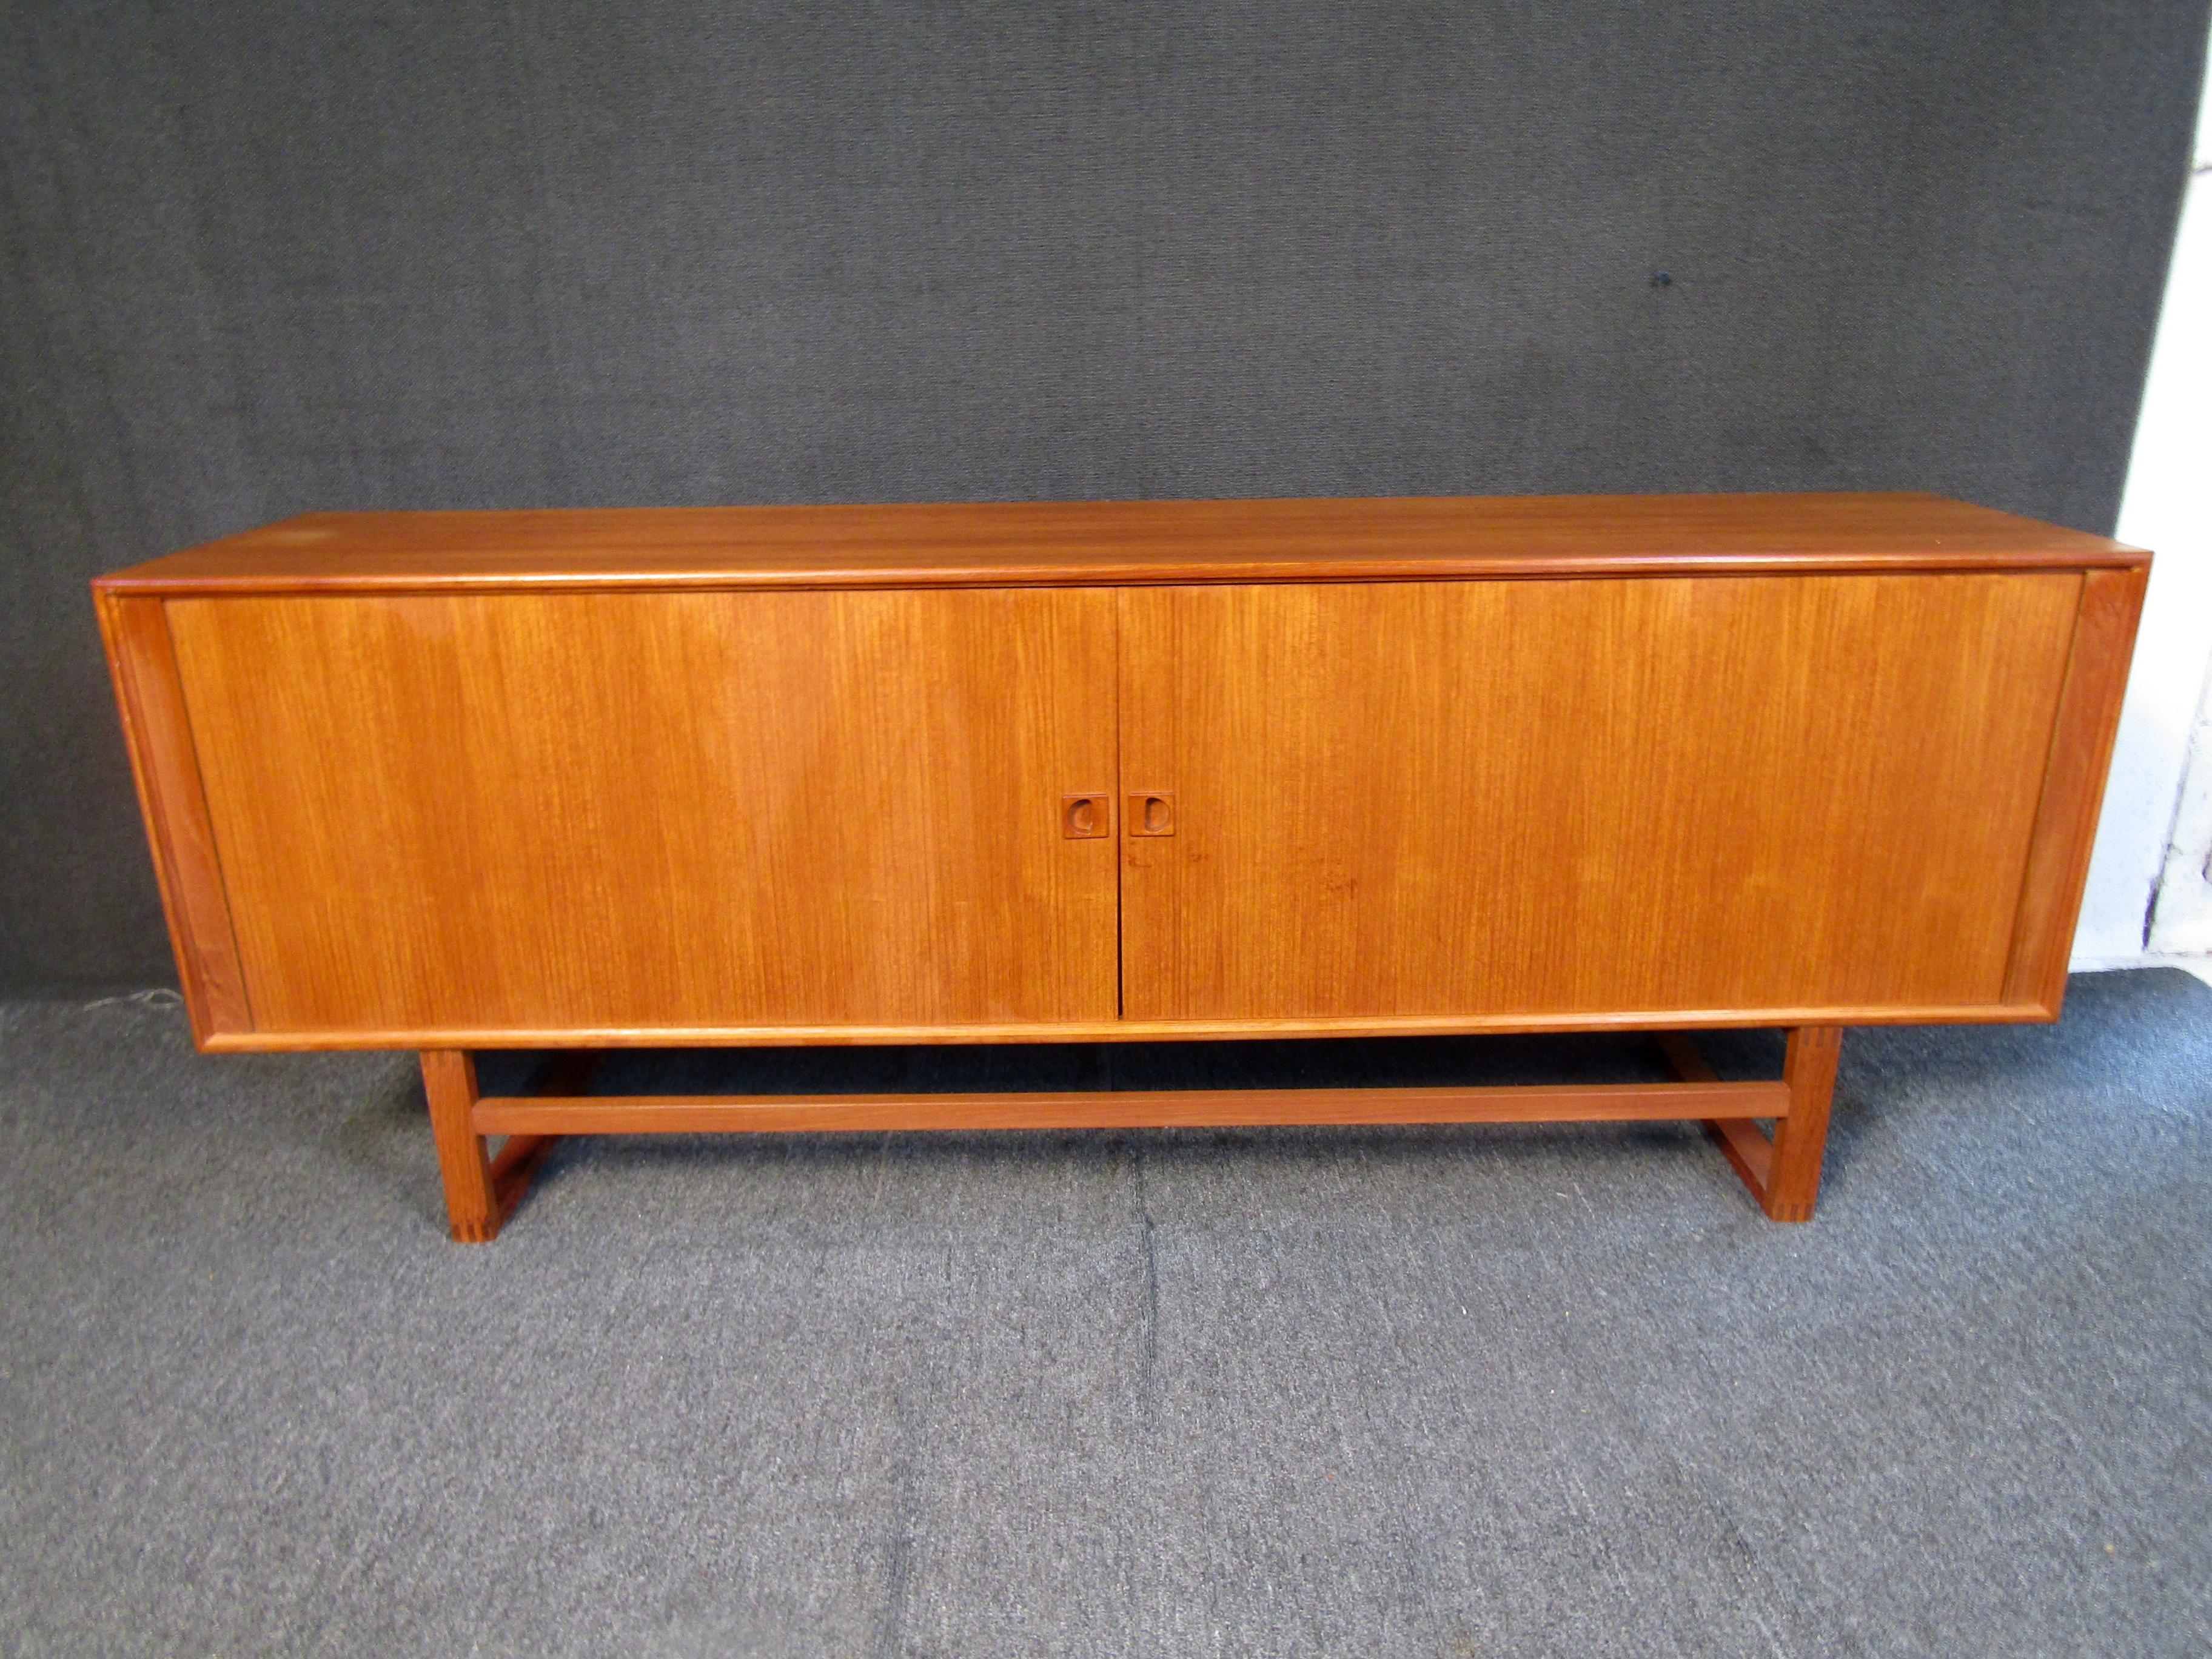 This stunning danish modern tambour door sideboard features a beautiful teak finish, and spacious interior cabinet space. Multiple shelves and a lined center drawer that makes this a versatile storage piece for any Mid-Century setting. Made in